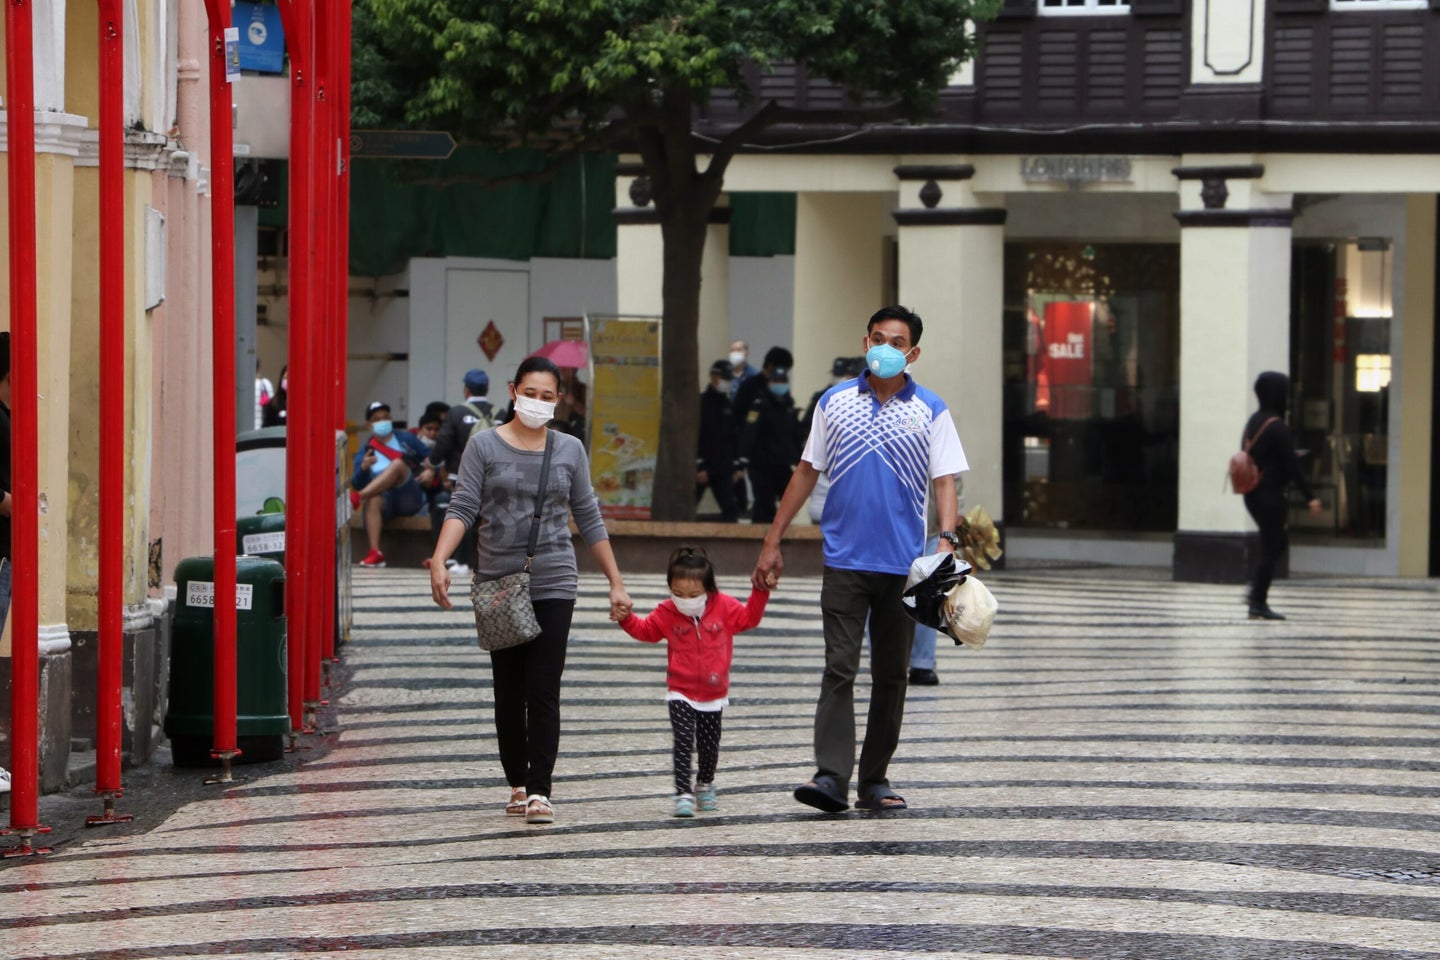 Two adults and a child walk wearing masks.